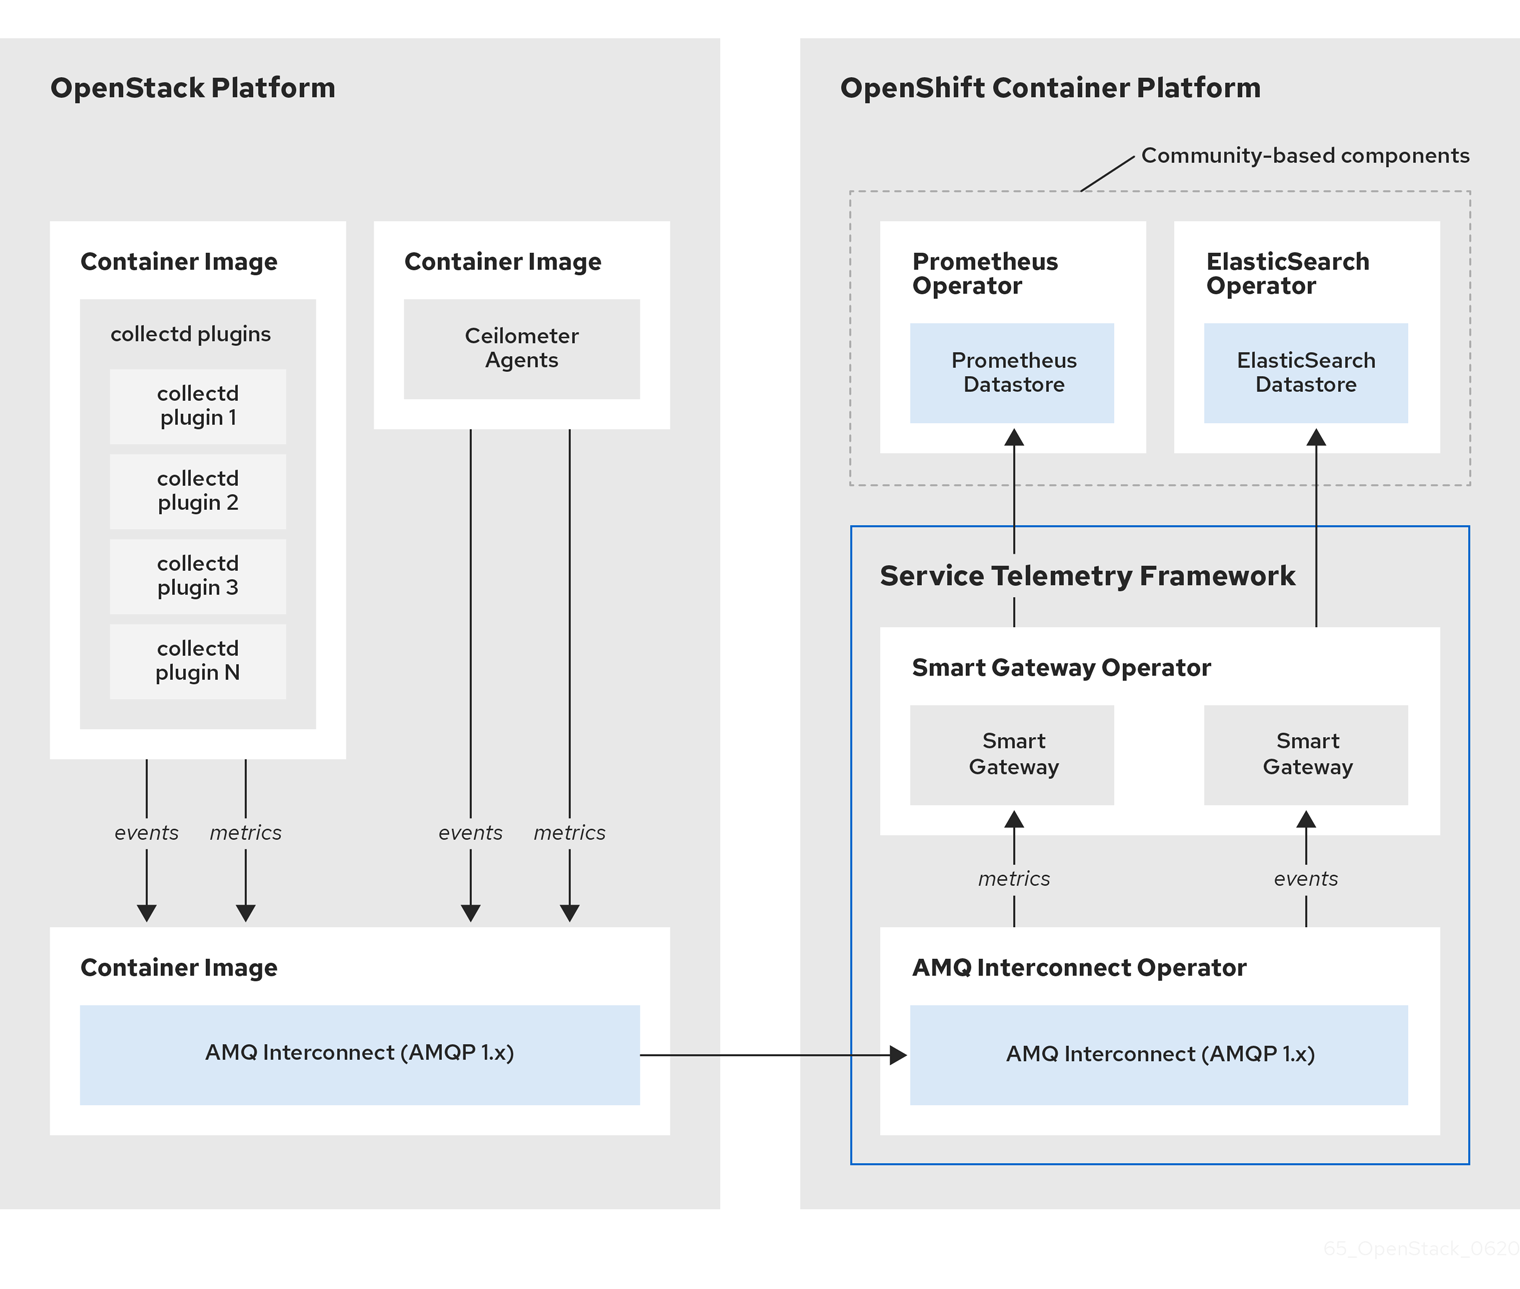 Service Telemetry Framework architecture overview